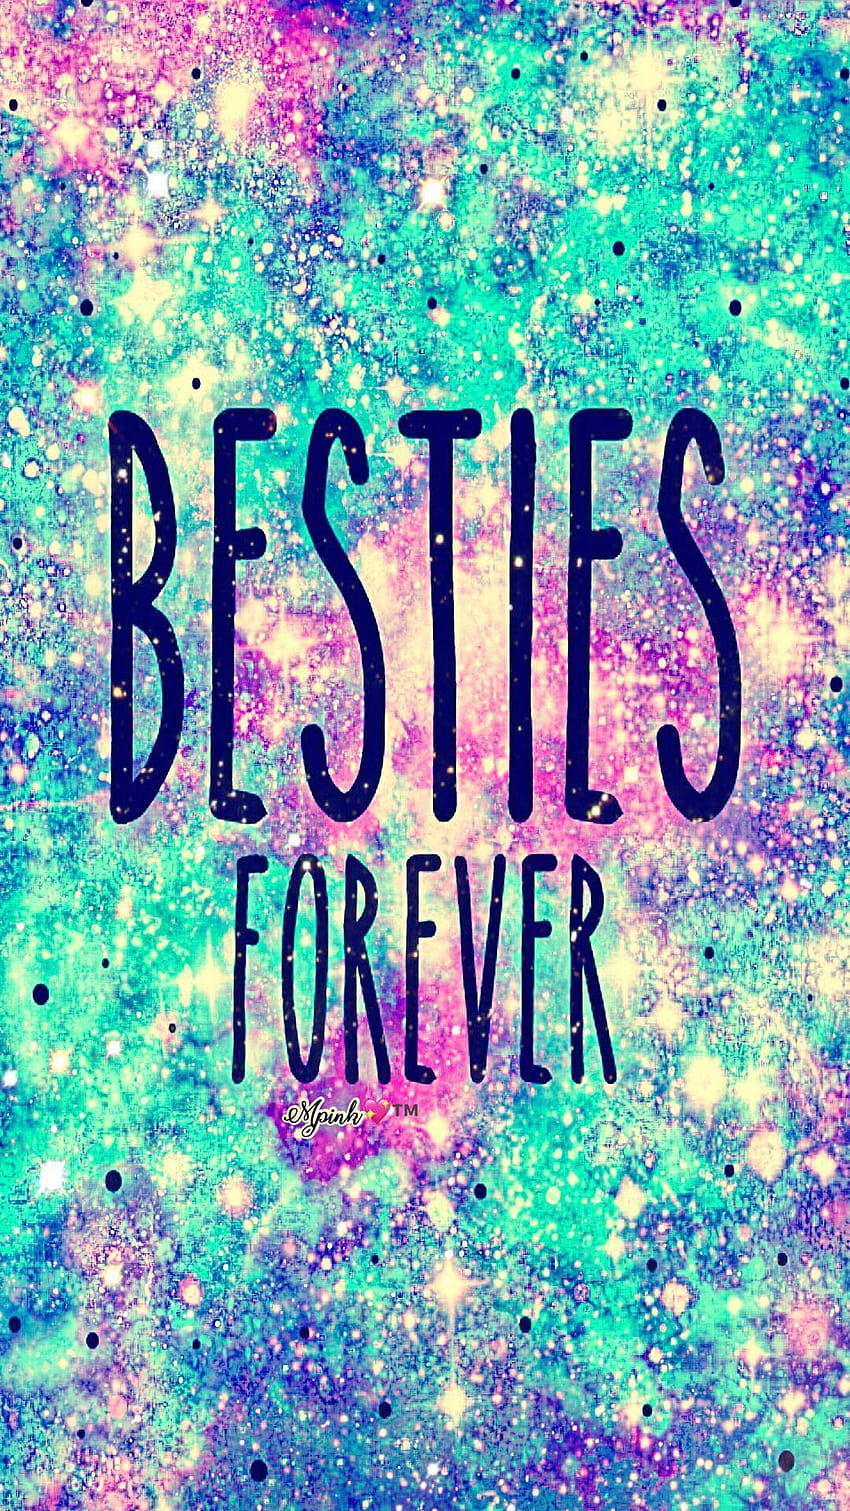 Besties Forever Galaxy, best friends forever backgrounds in ...